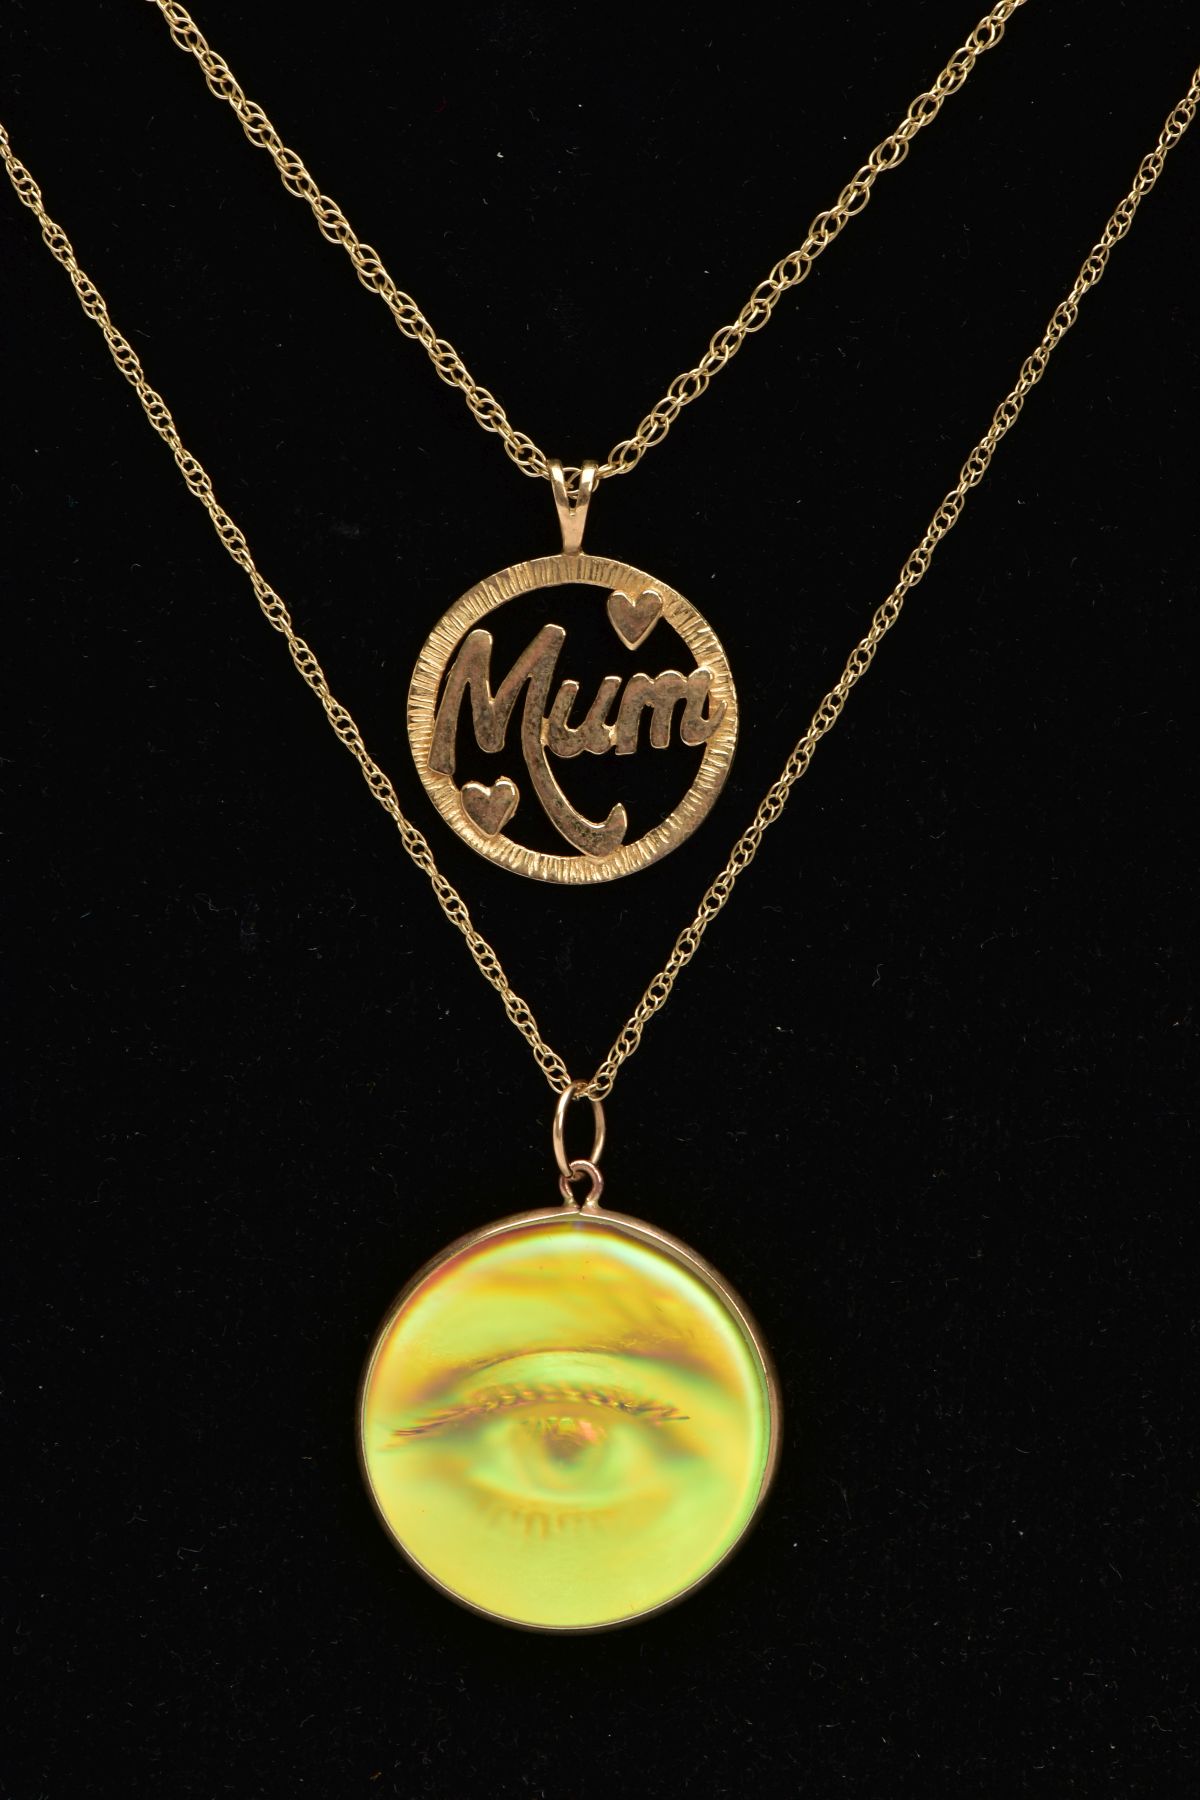 A 9CT GOLD 'MOM' PENDANT AND CHAIN, A YELLOW METAL CHAIN AND A PENDANT, the pendant of an open